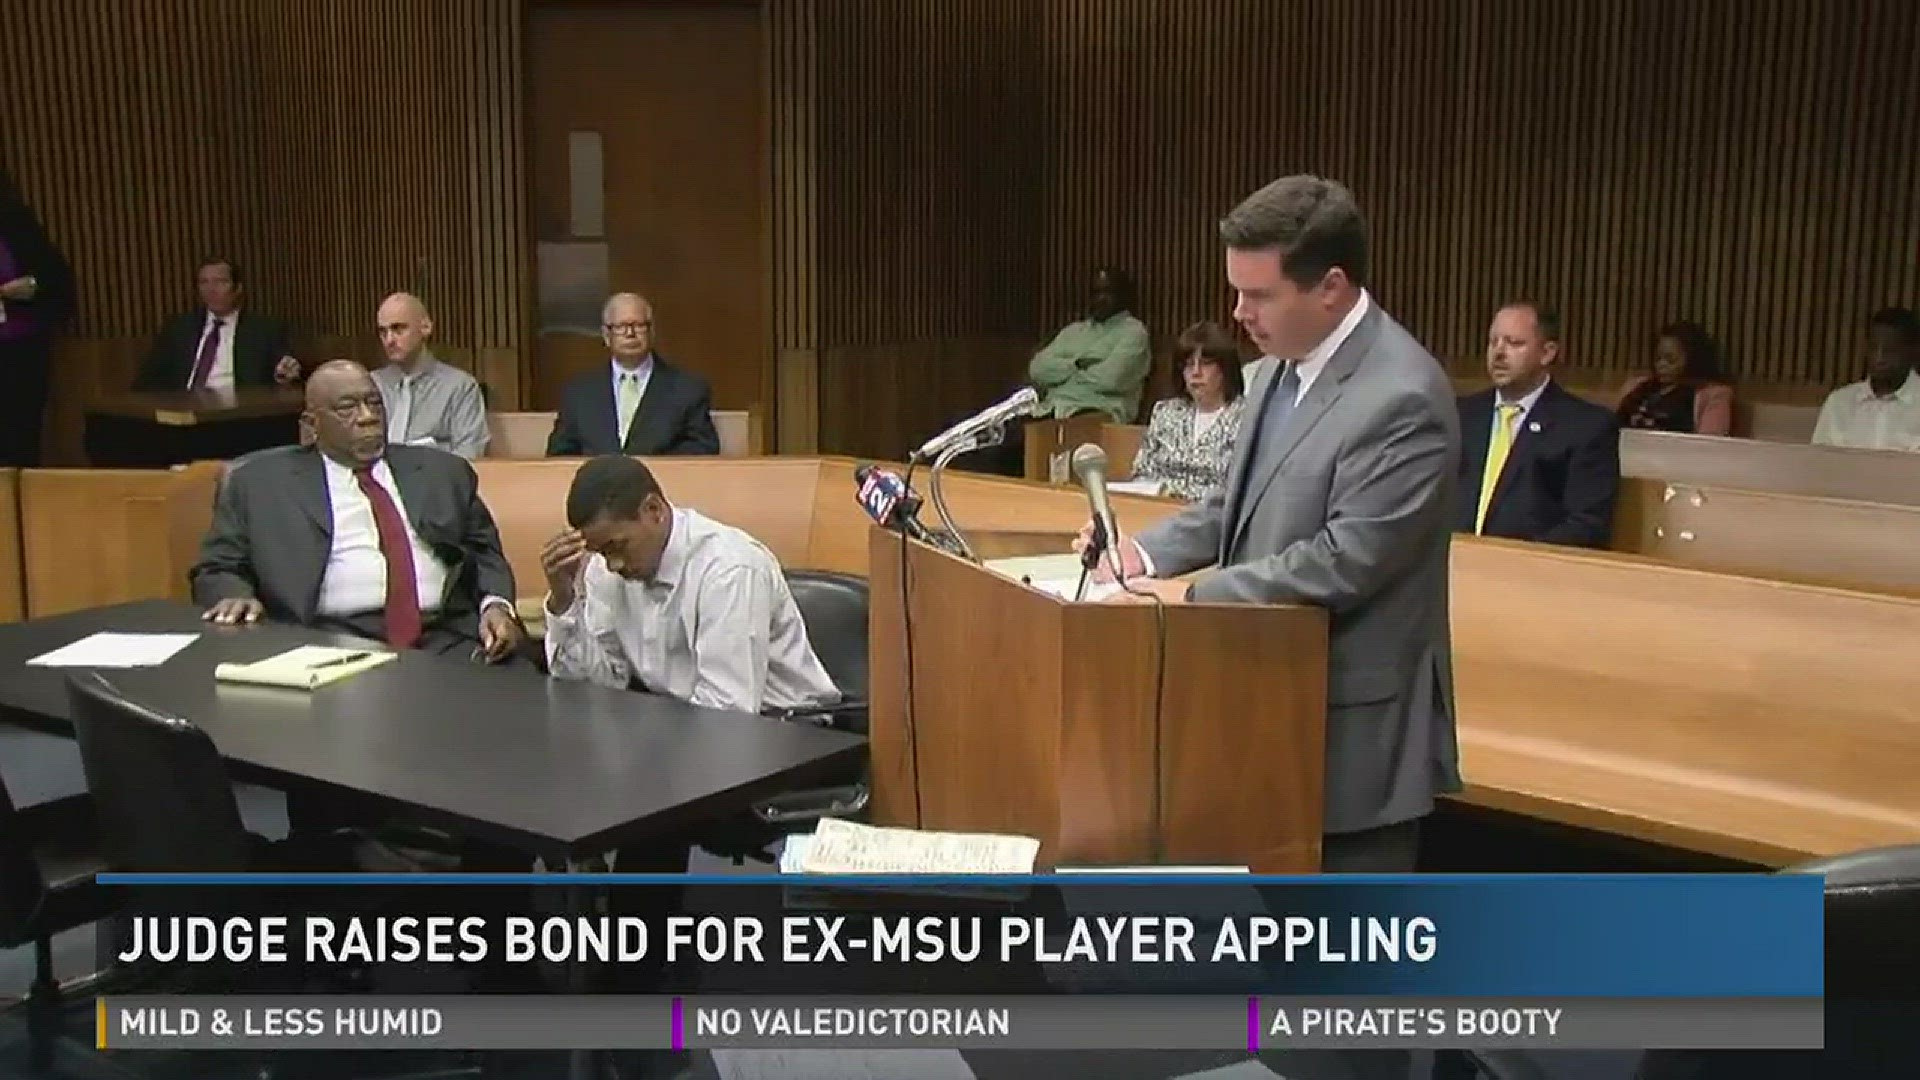 Bond increased for Keith Appling